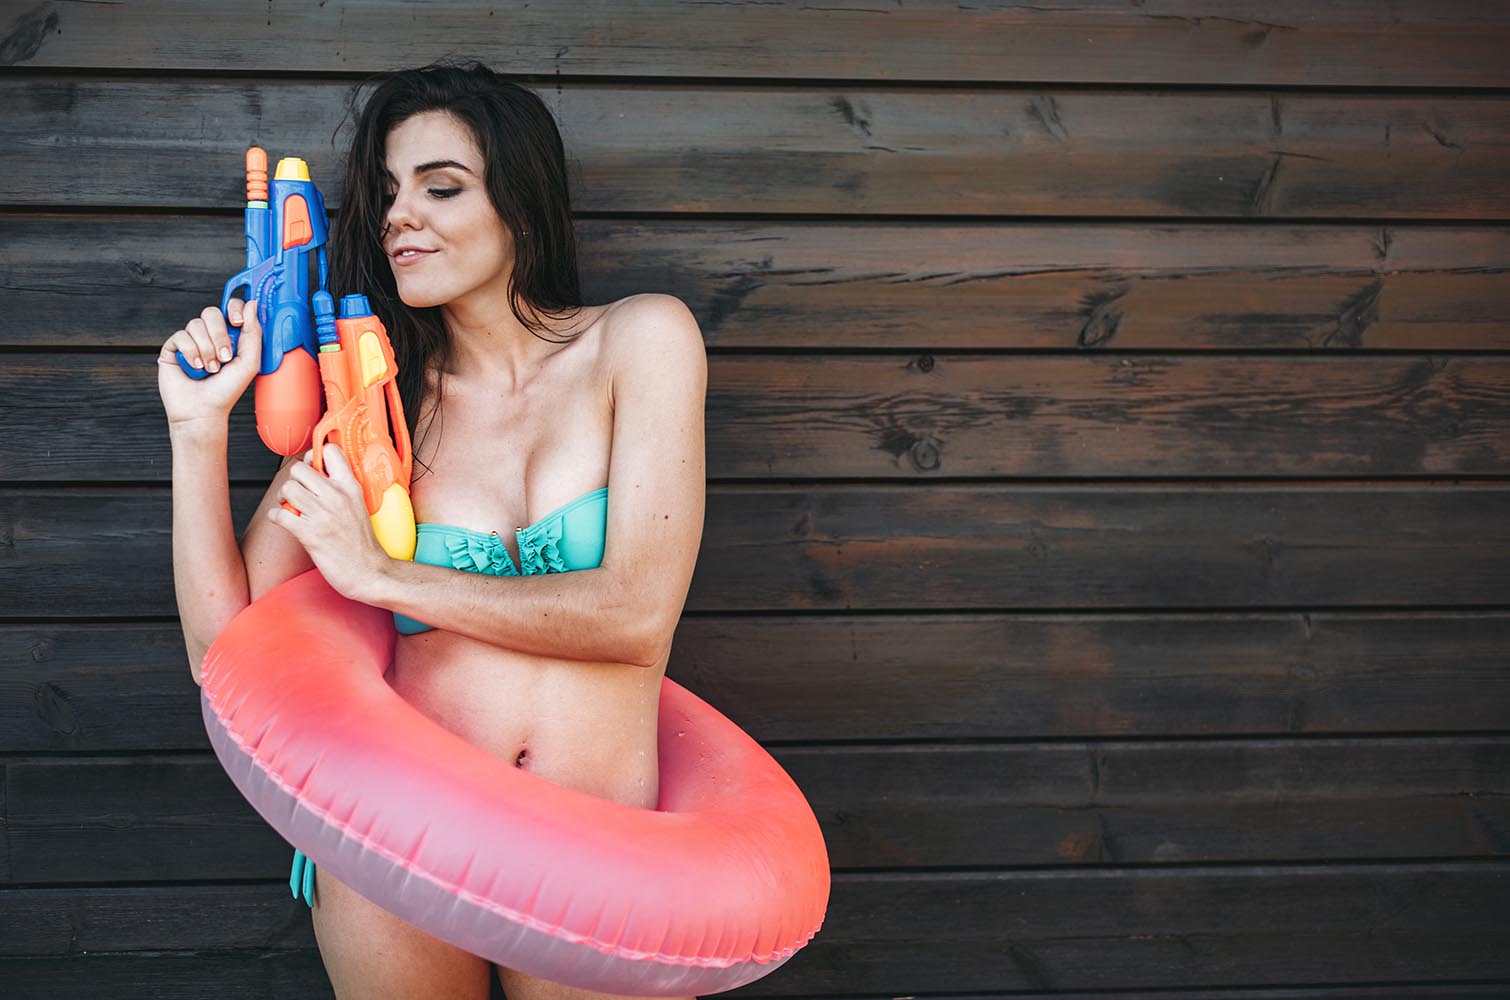 Young lady with two water guns posing